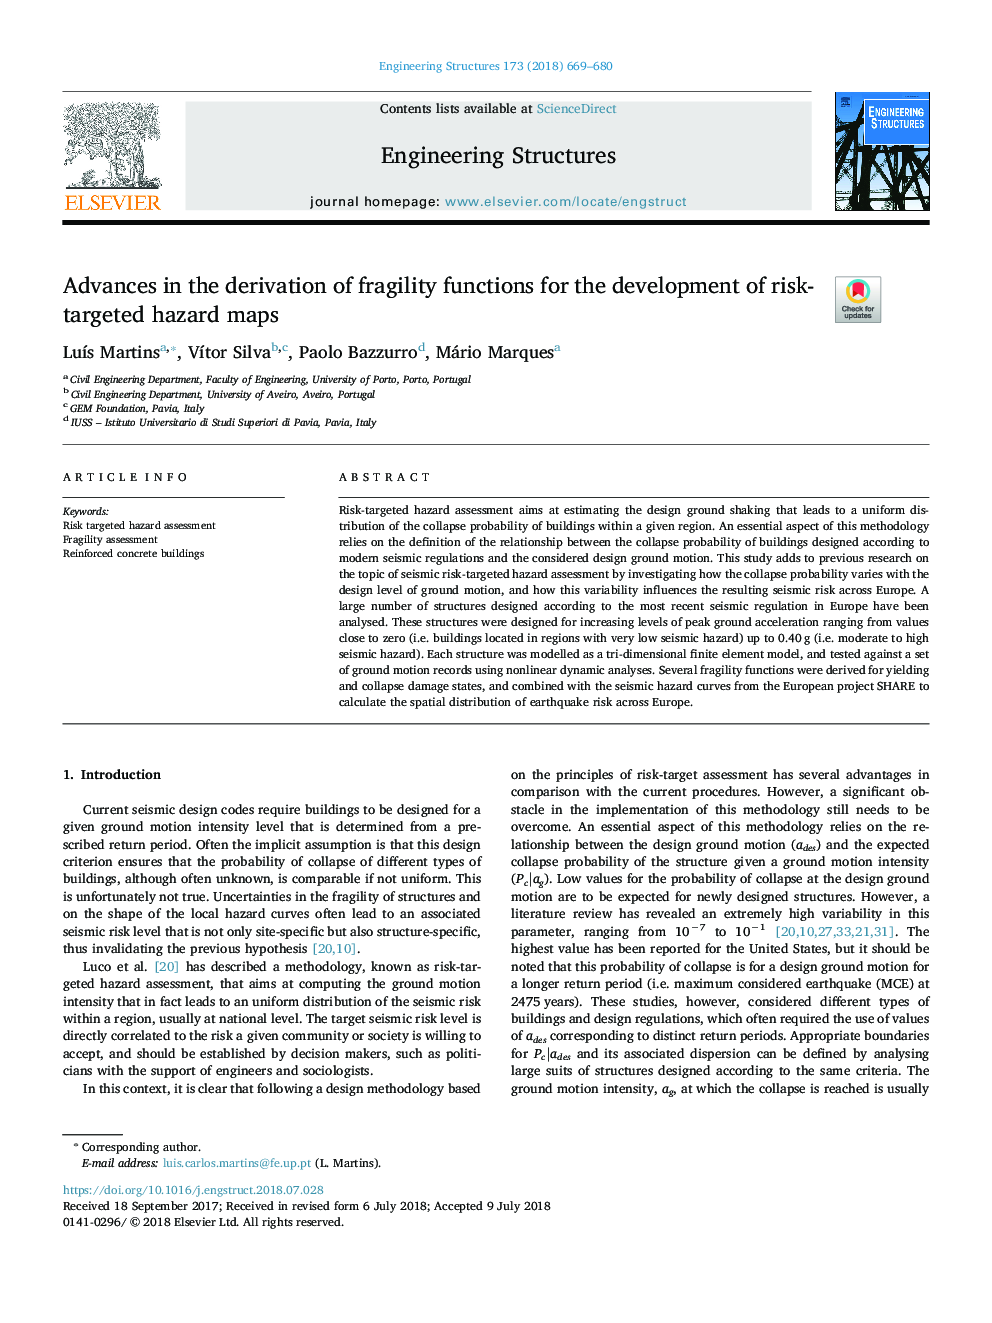 Advances in the derivation of fragility functions for the development of risk-targeted hazard maps